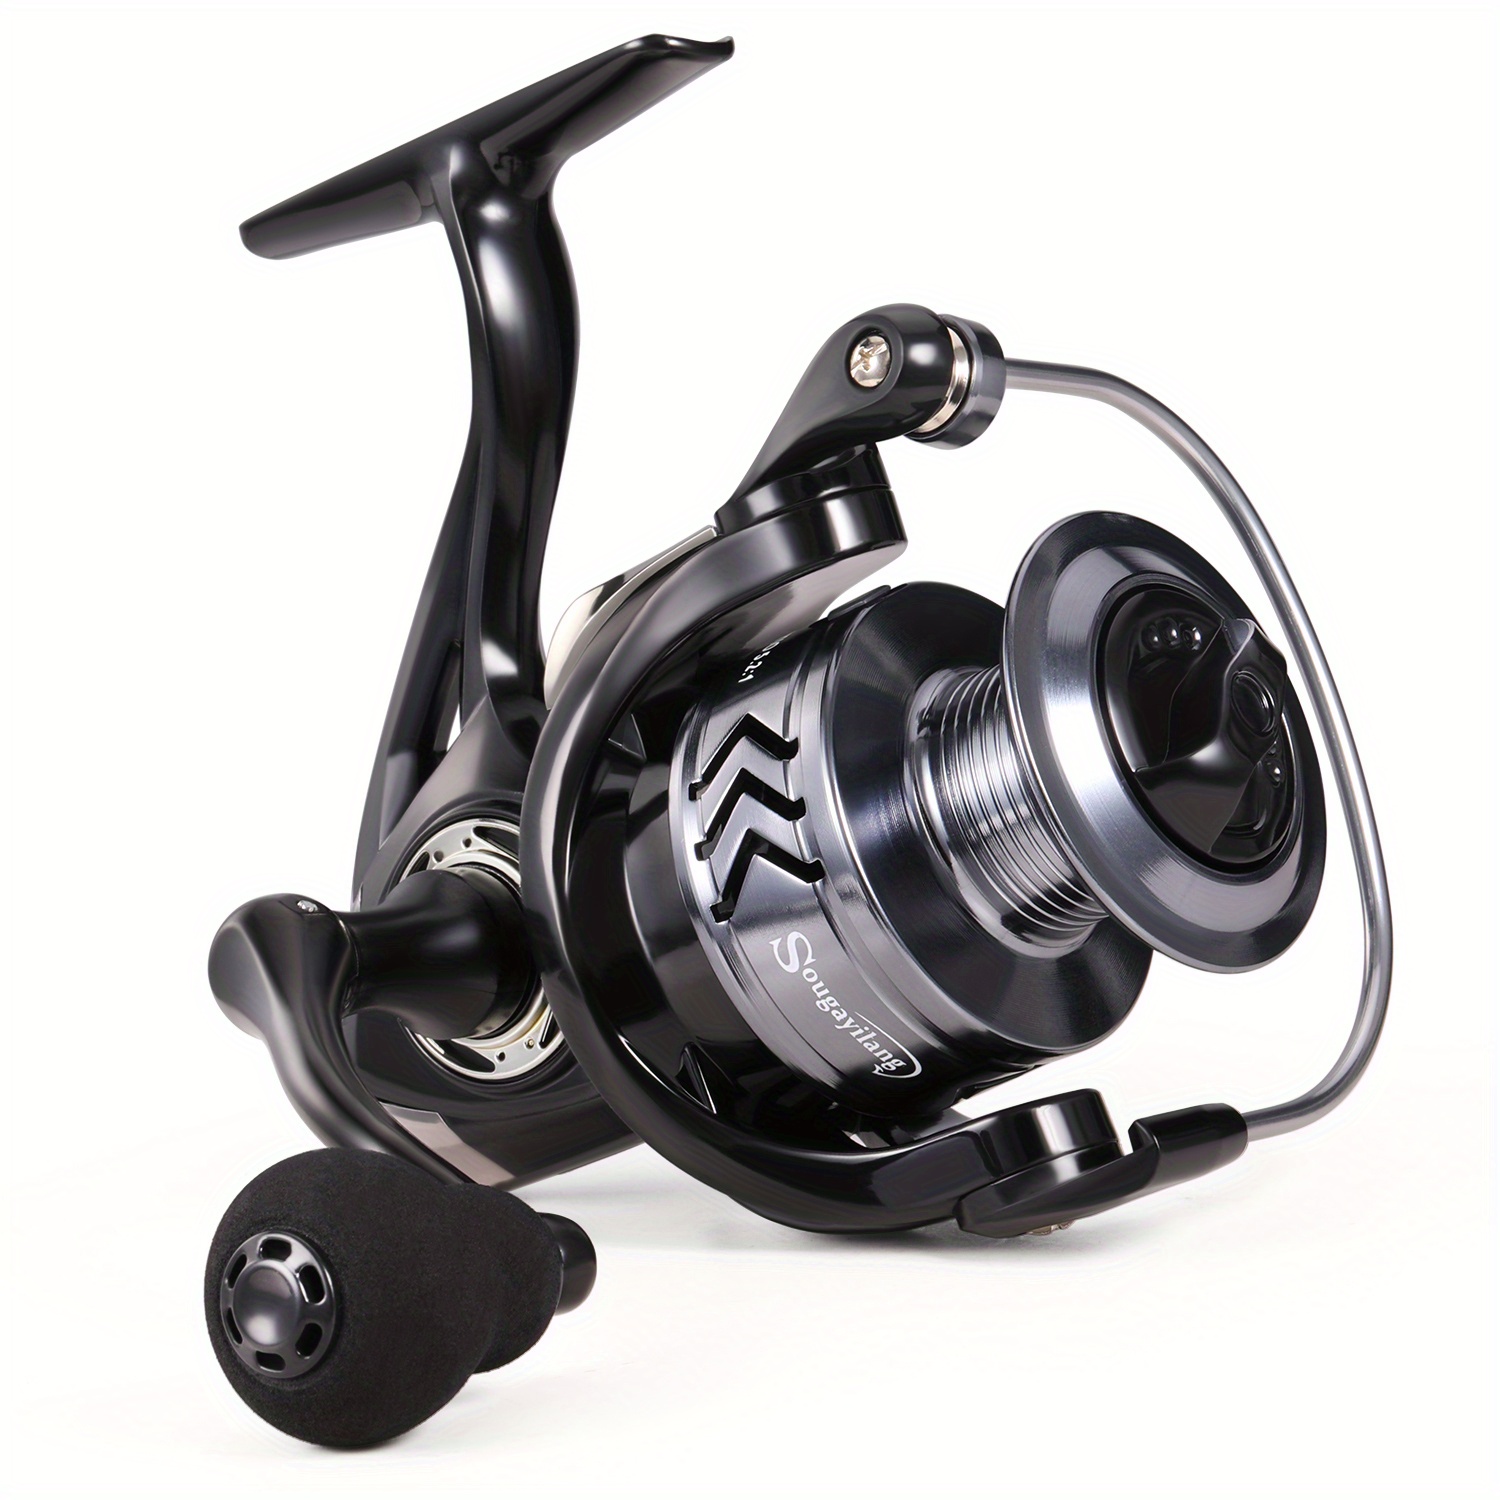 5.2/1 Baitcasting Reel Stable High Speed Fishing Casting Reel Left Right  Hand Interchangeable Metal Bearings Outdoor Accessories